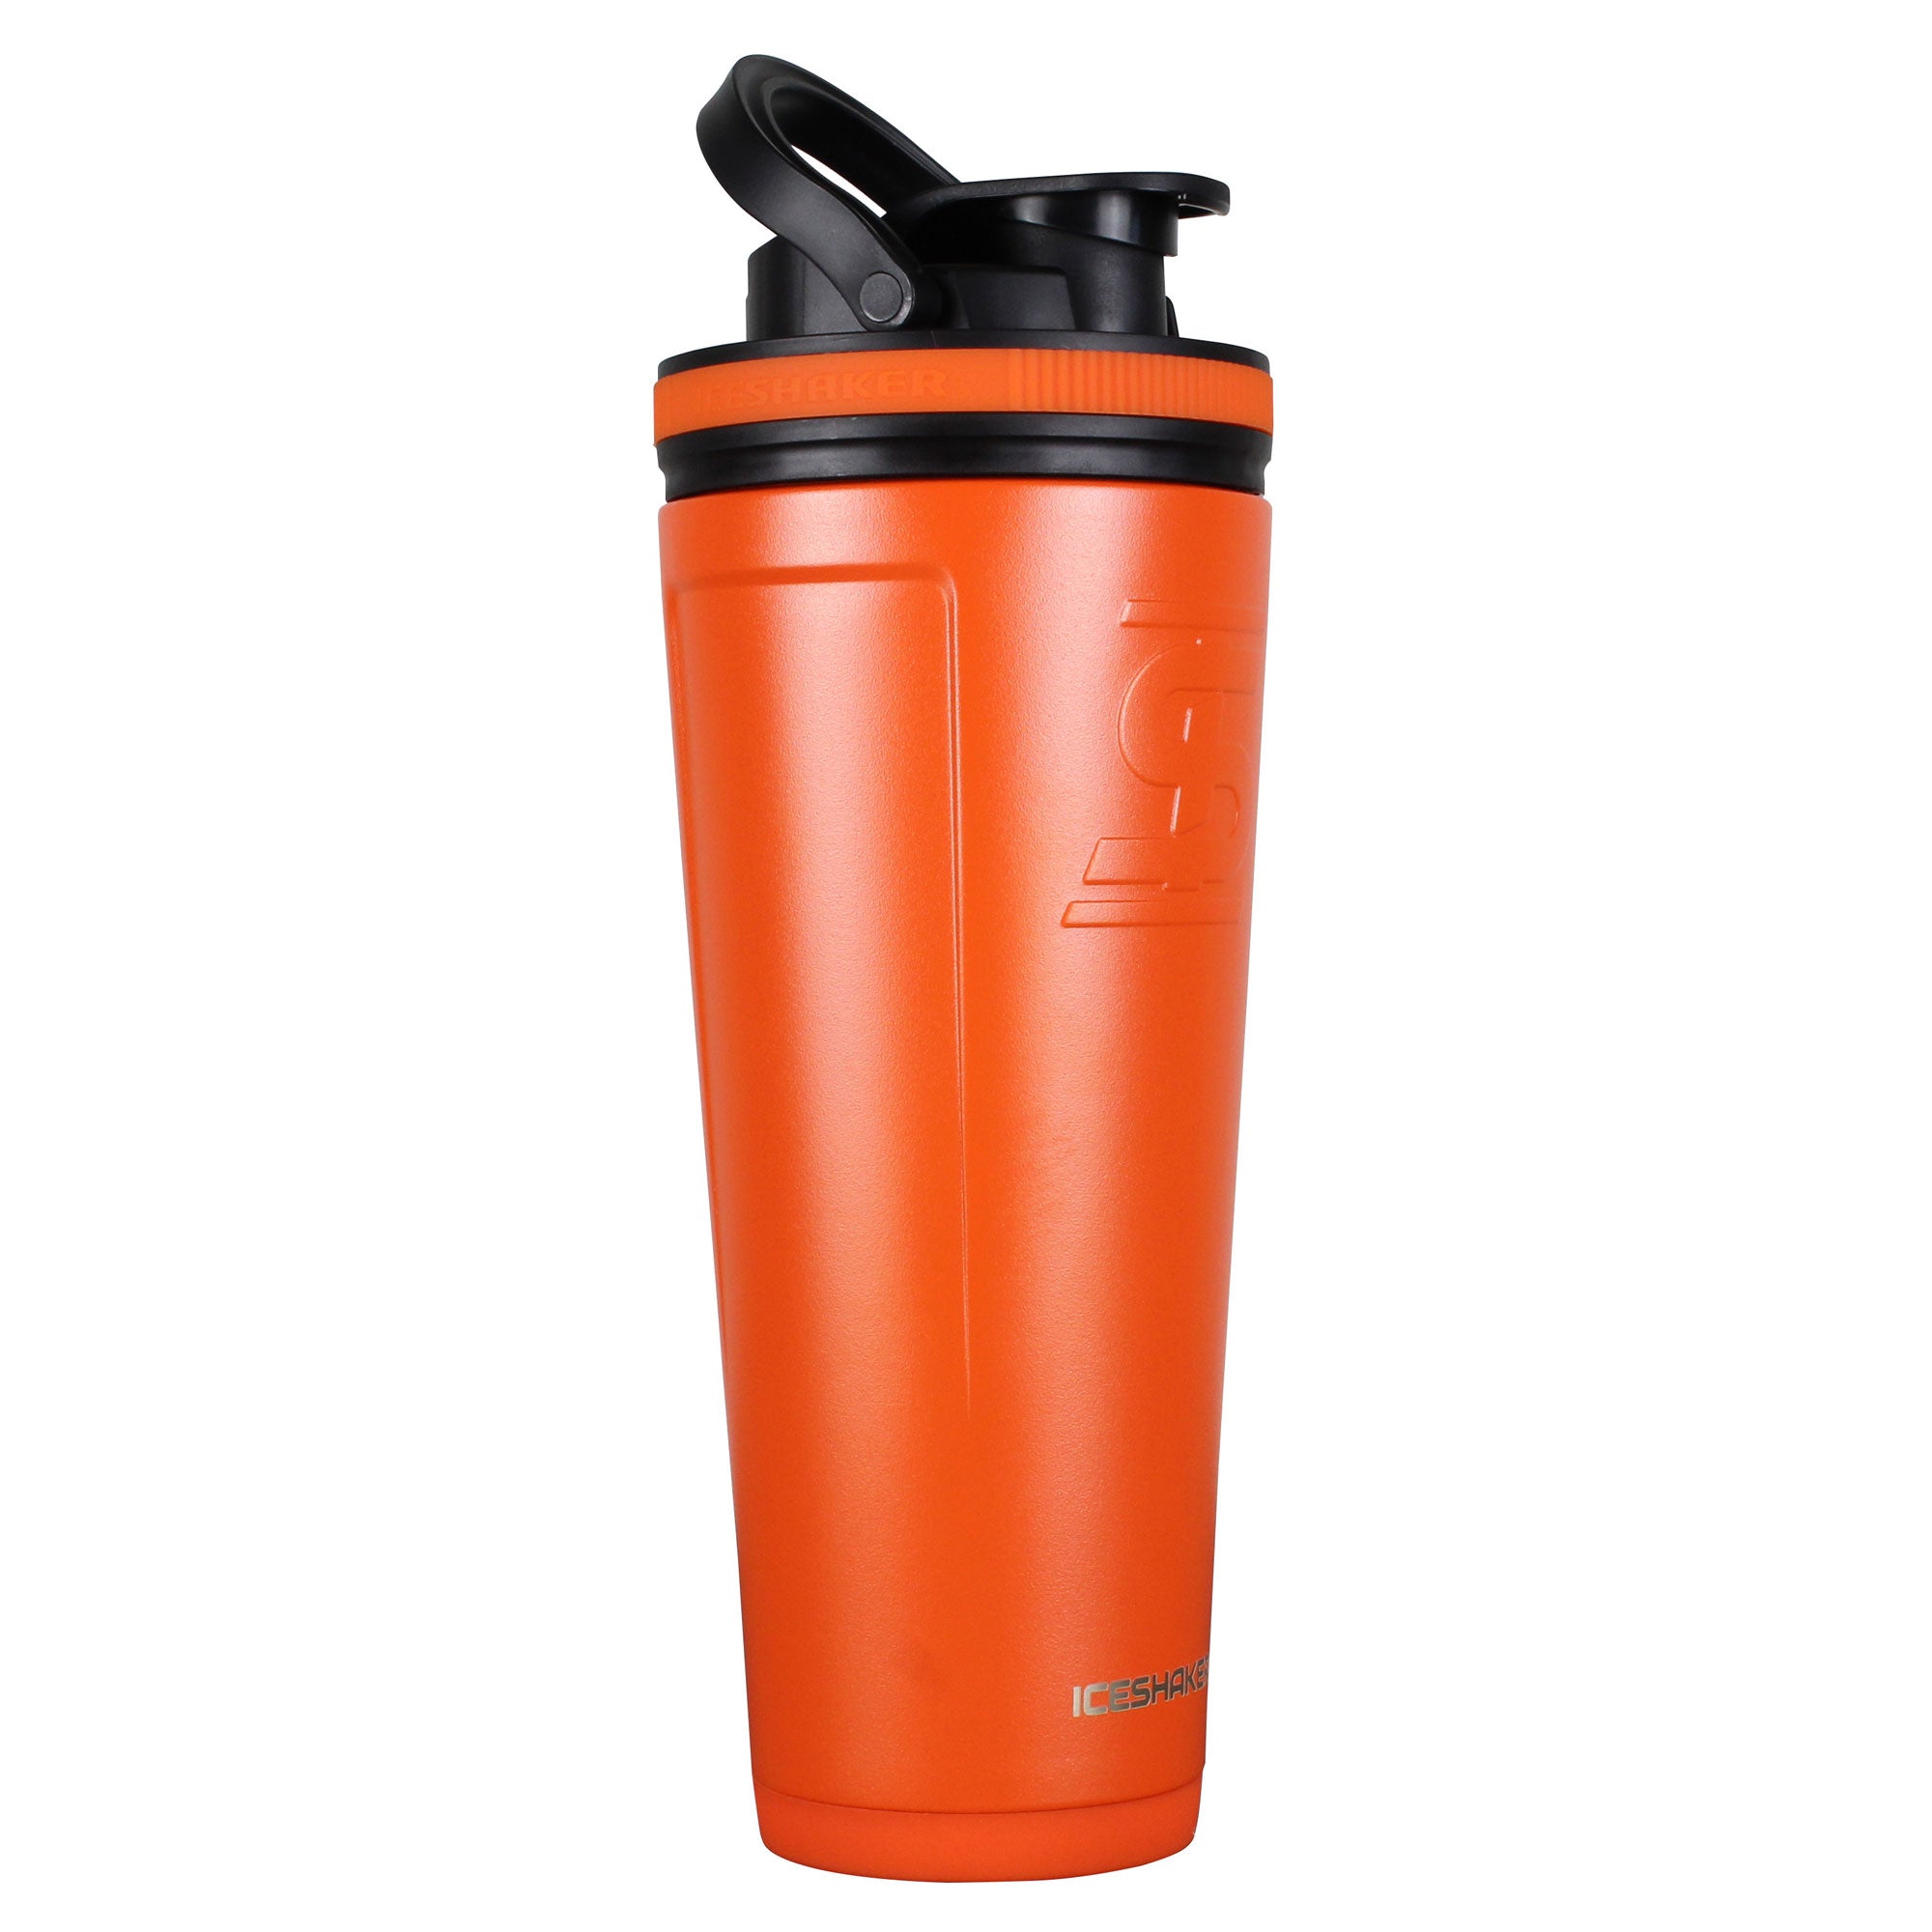 Stainless Steel Protein Shake Bottle size 25 oz on Sales